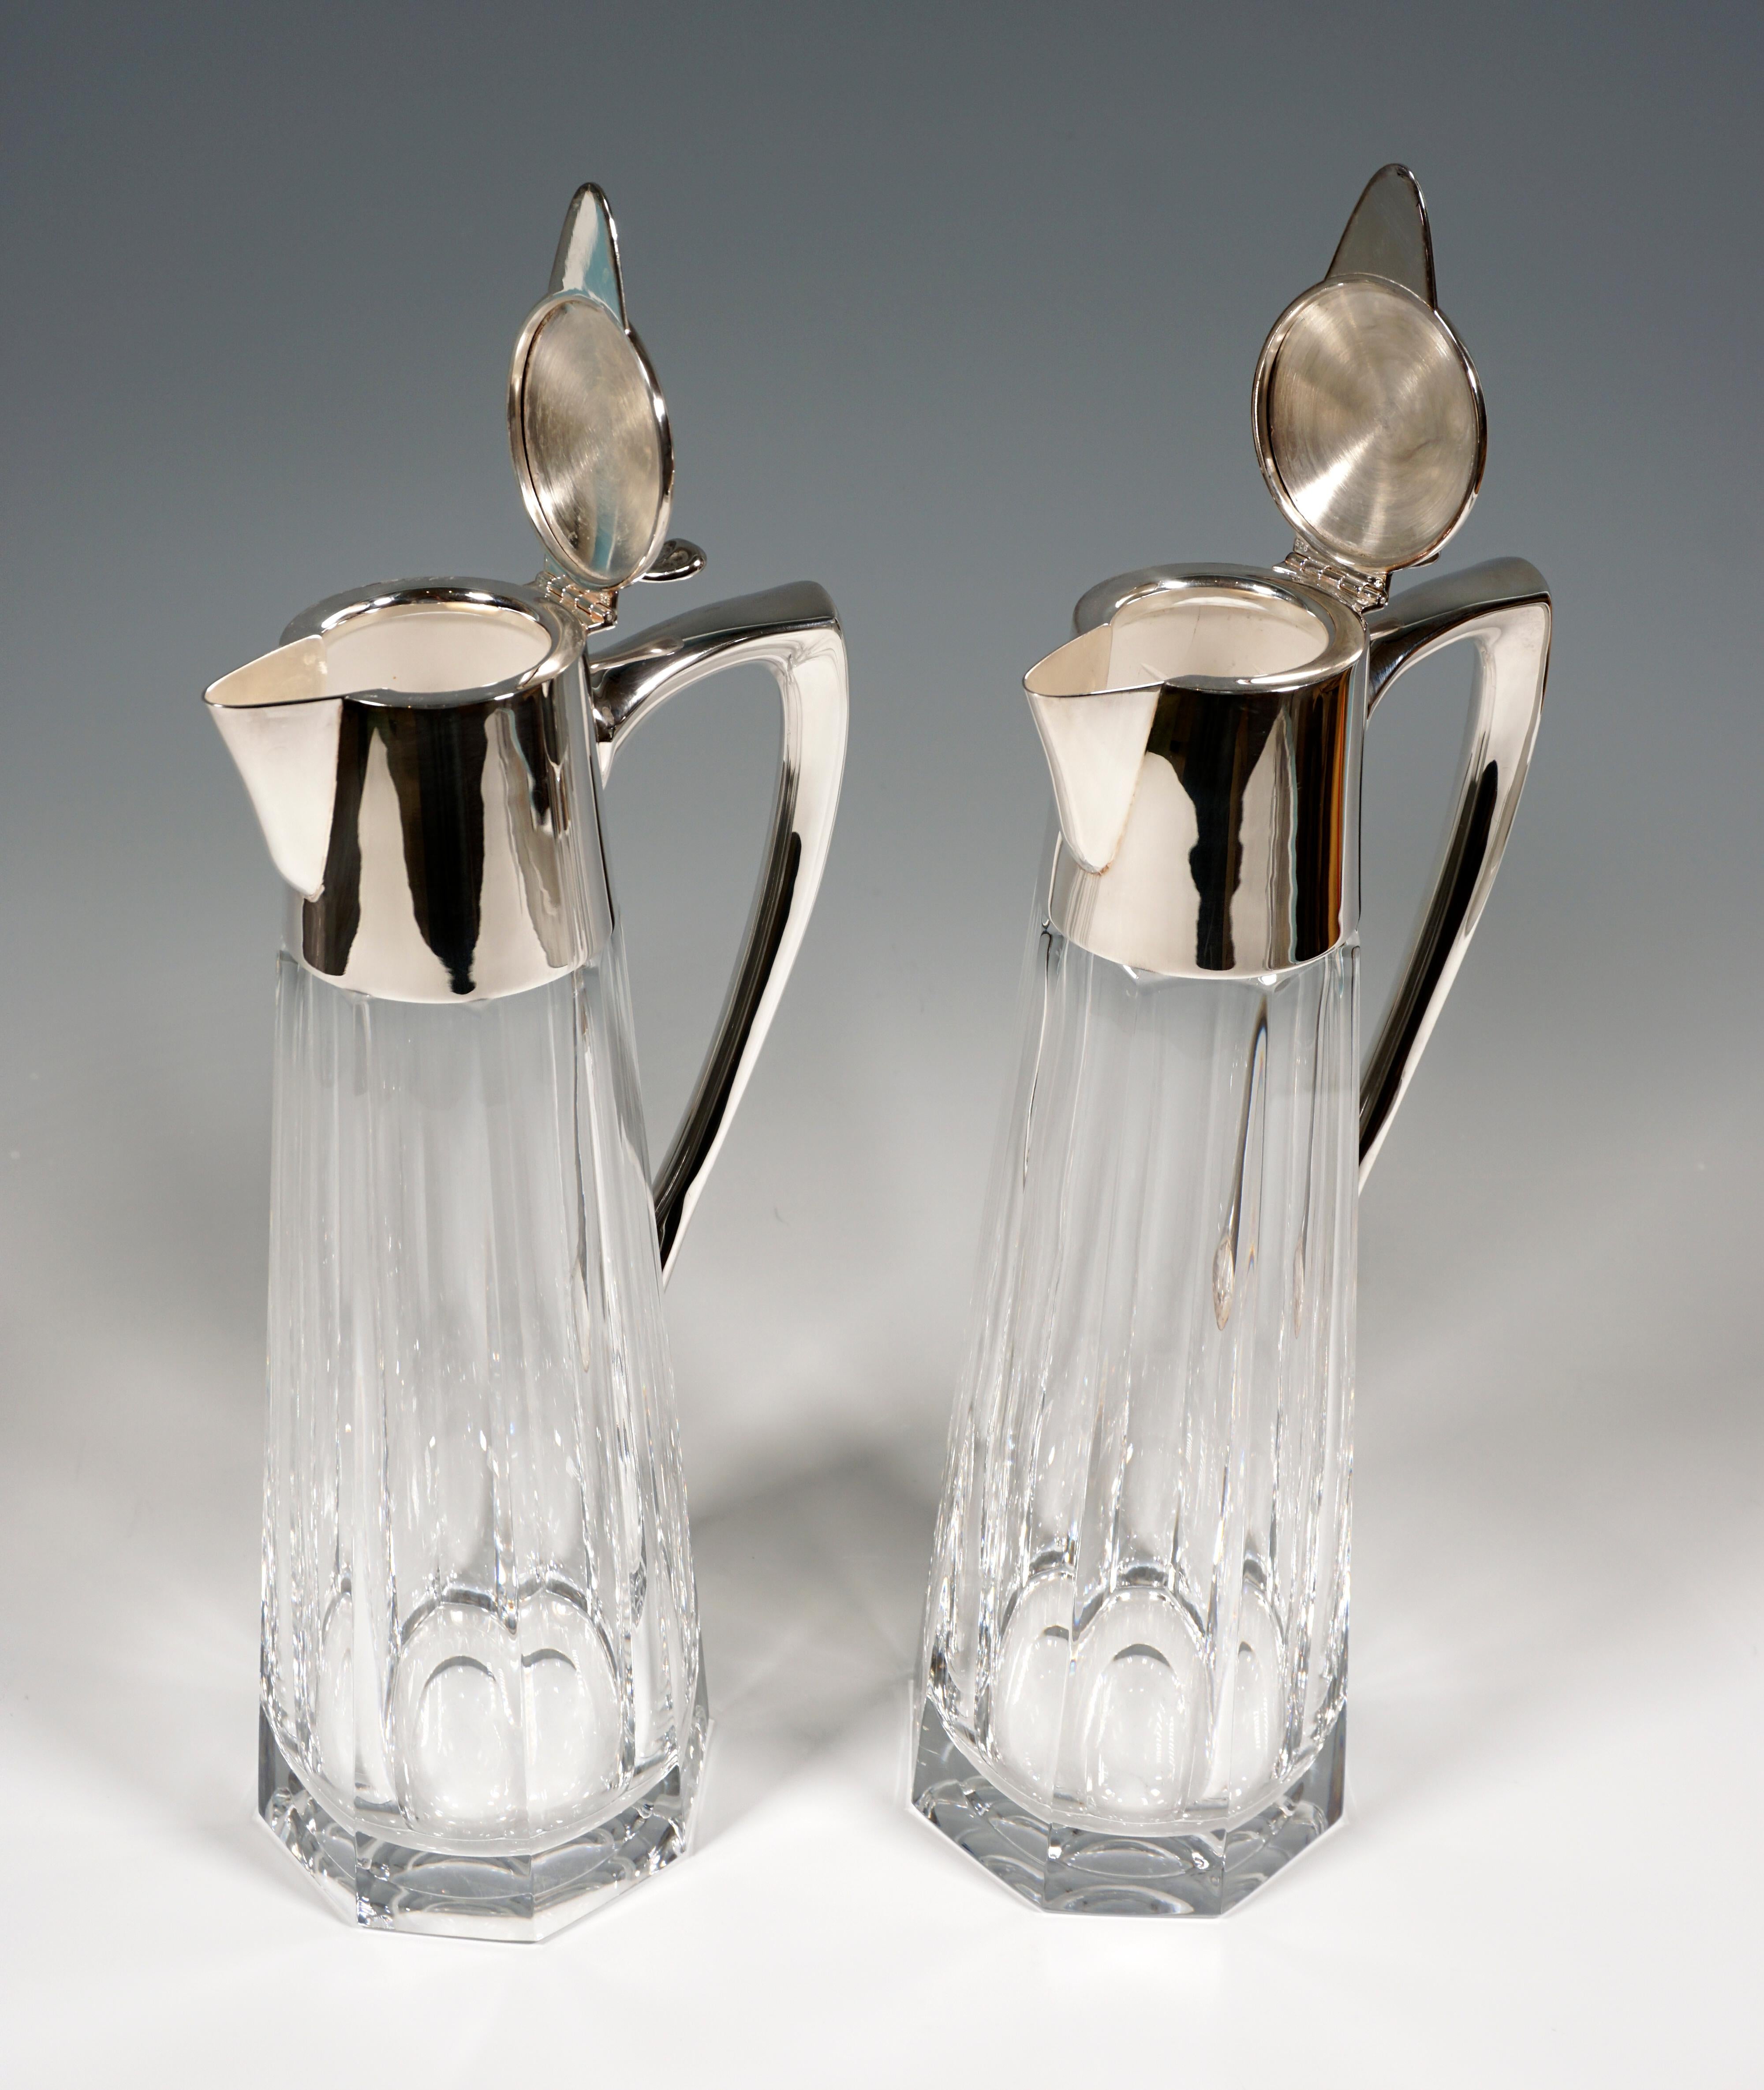 Faceted Pair of Glass Carafes with Silver Mounts, Gebrüder Kühn, Germany, Early 20th